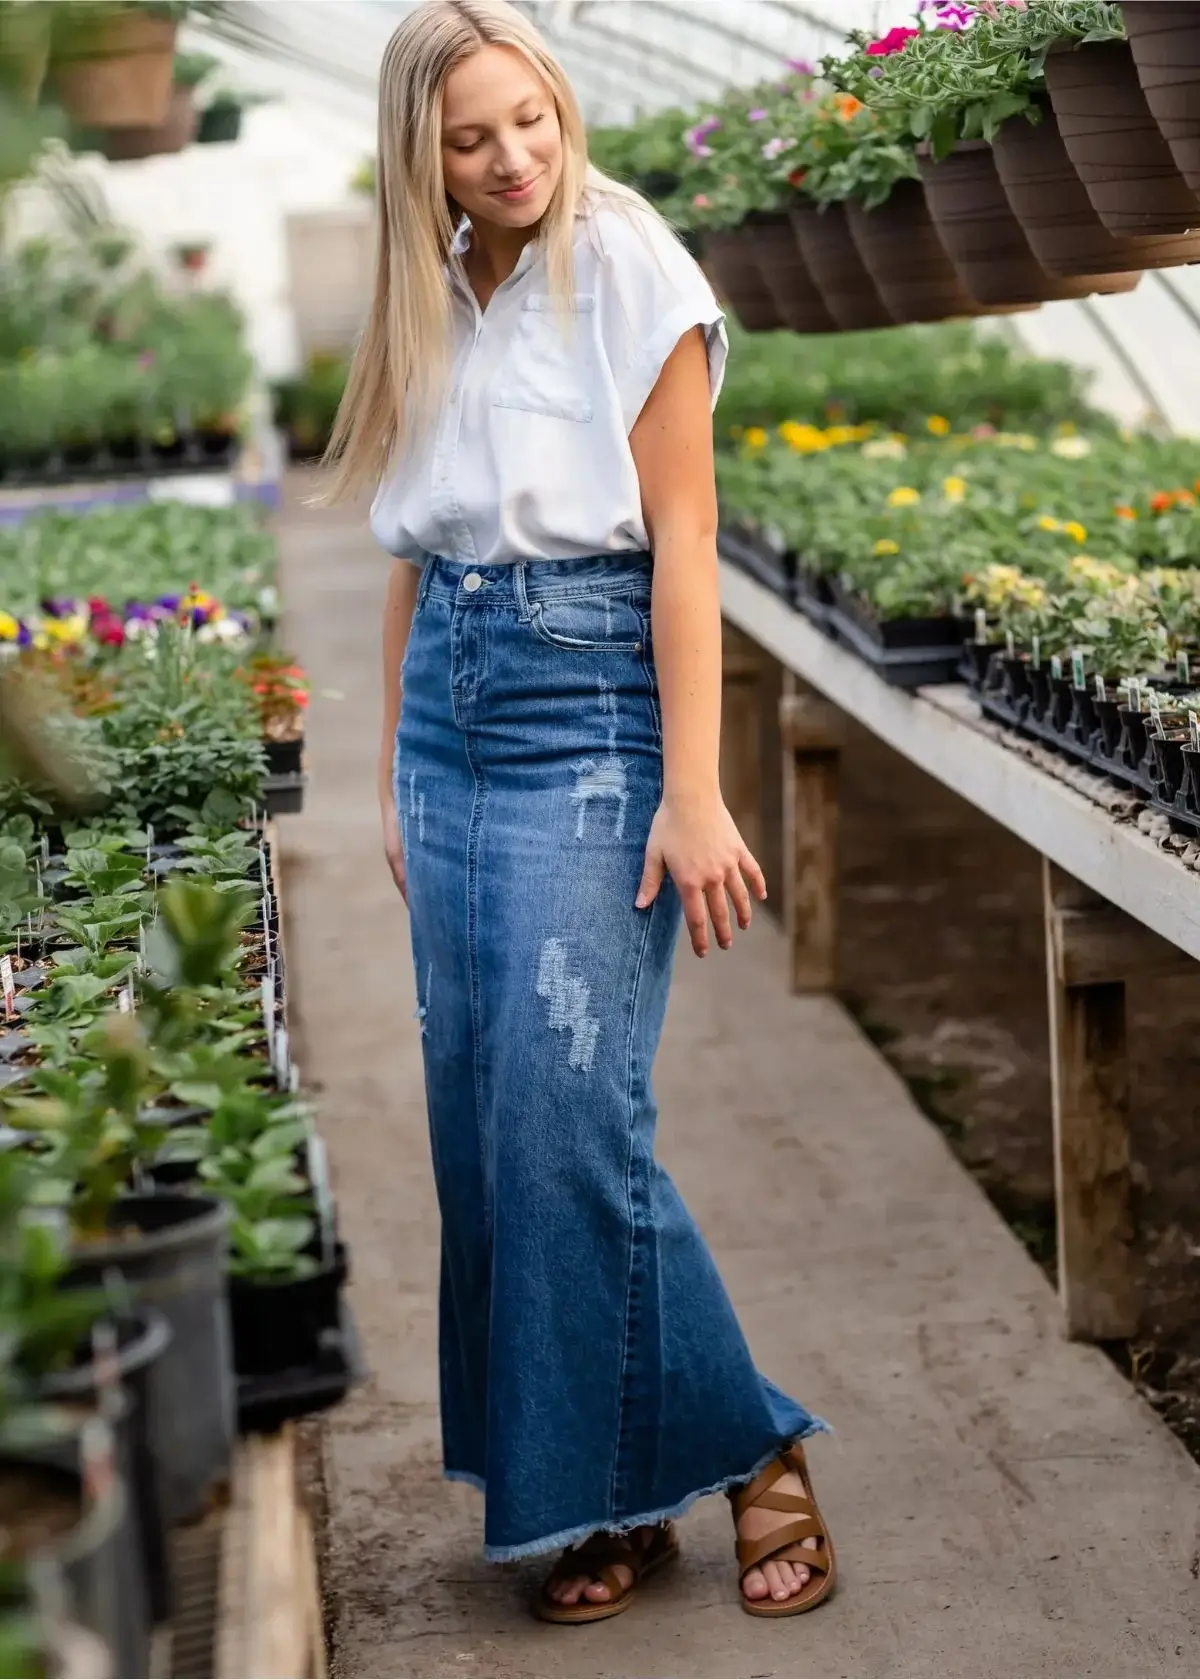 Are long denim skirts suitable for all body types?